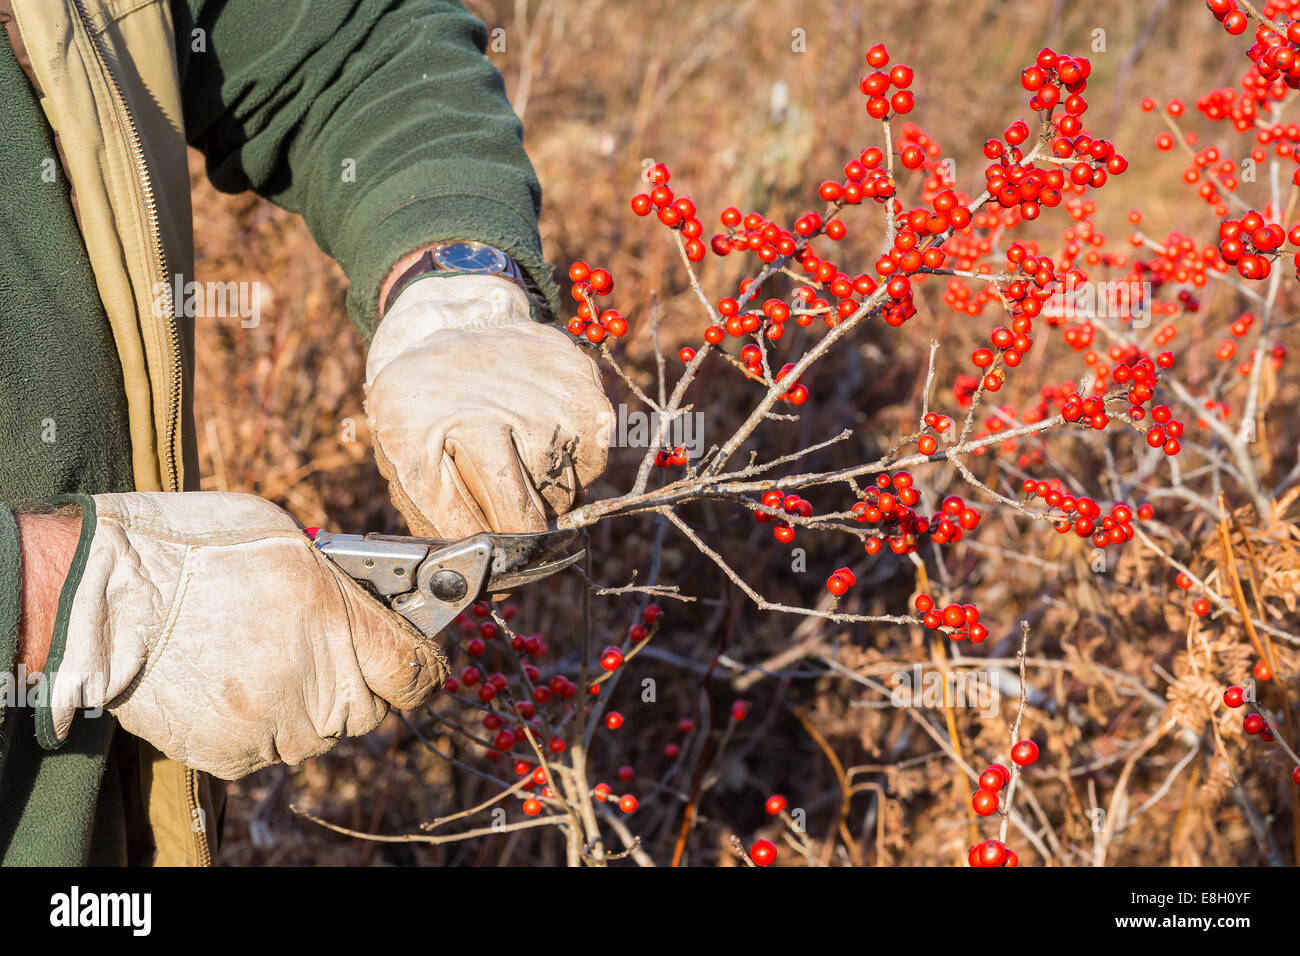 Ilex verticillata, the winterberry, is a species of holly native to eastern North America in the United States and southeast Can Stock Photo